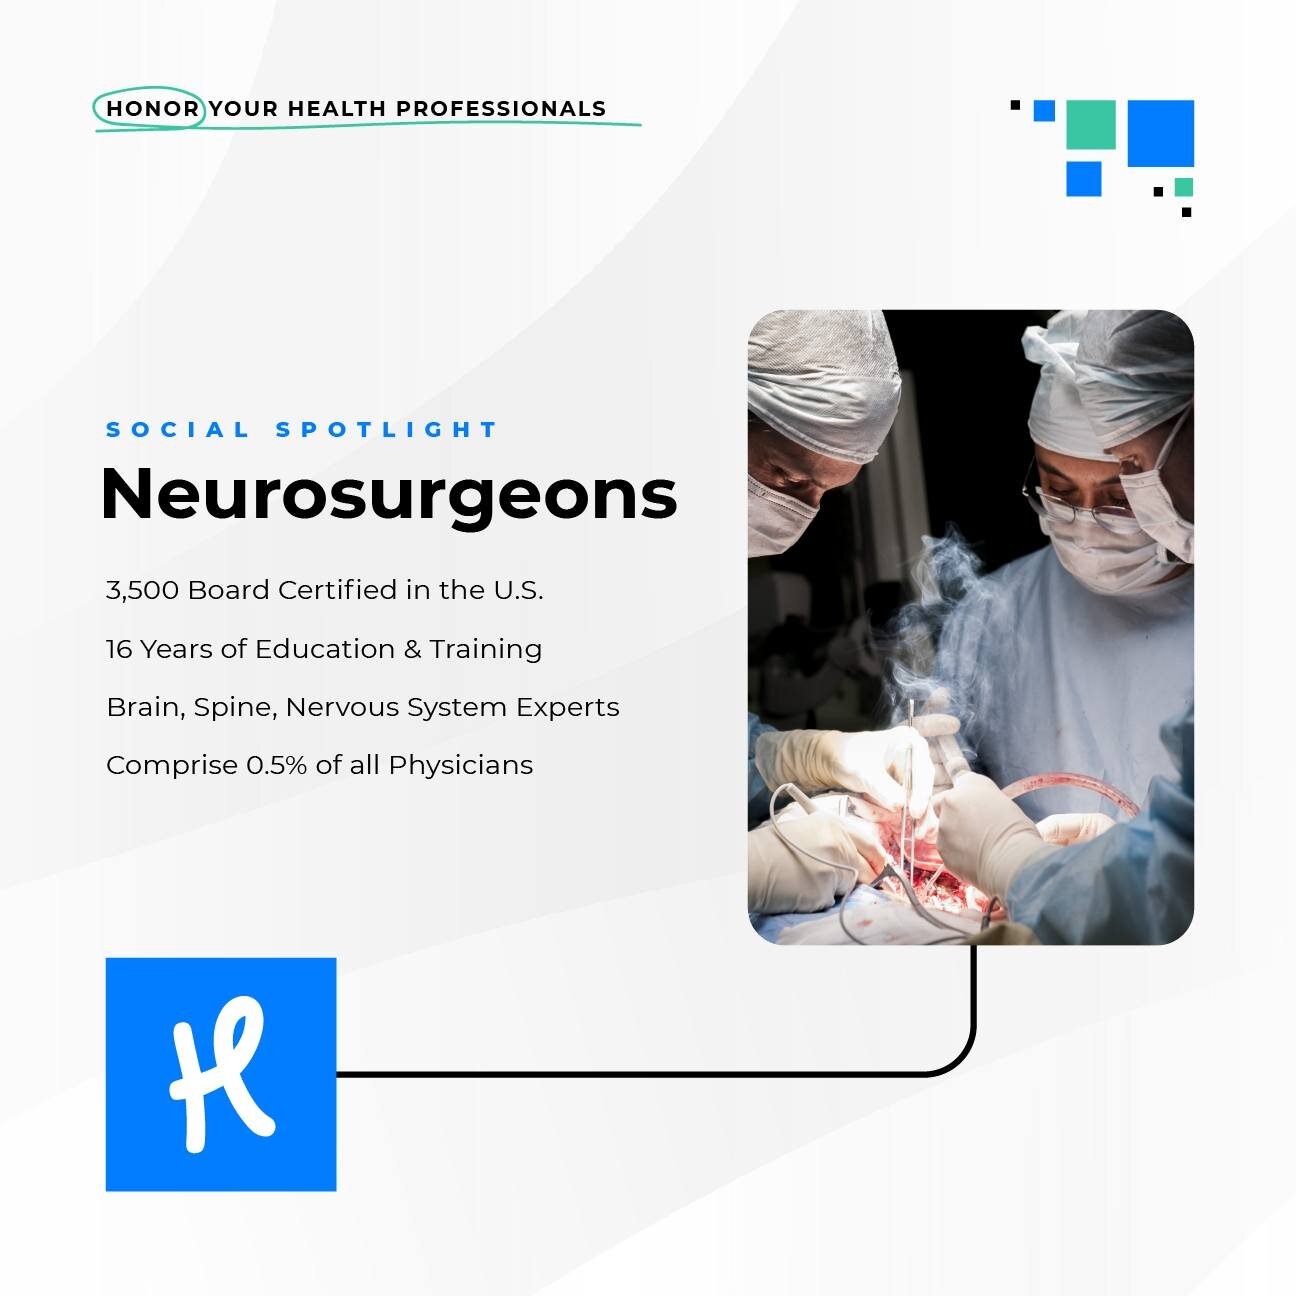 WE CELEBRATE NEUROSURGEONS!

The amount of respect we have for neurosurgeons is hard to articulate.

It's an incredibly difficult profession filled with seriously complicated procedures and stressful, long weeks BUT these heroes persevere and are ded